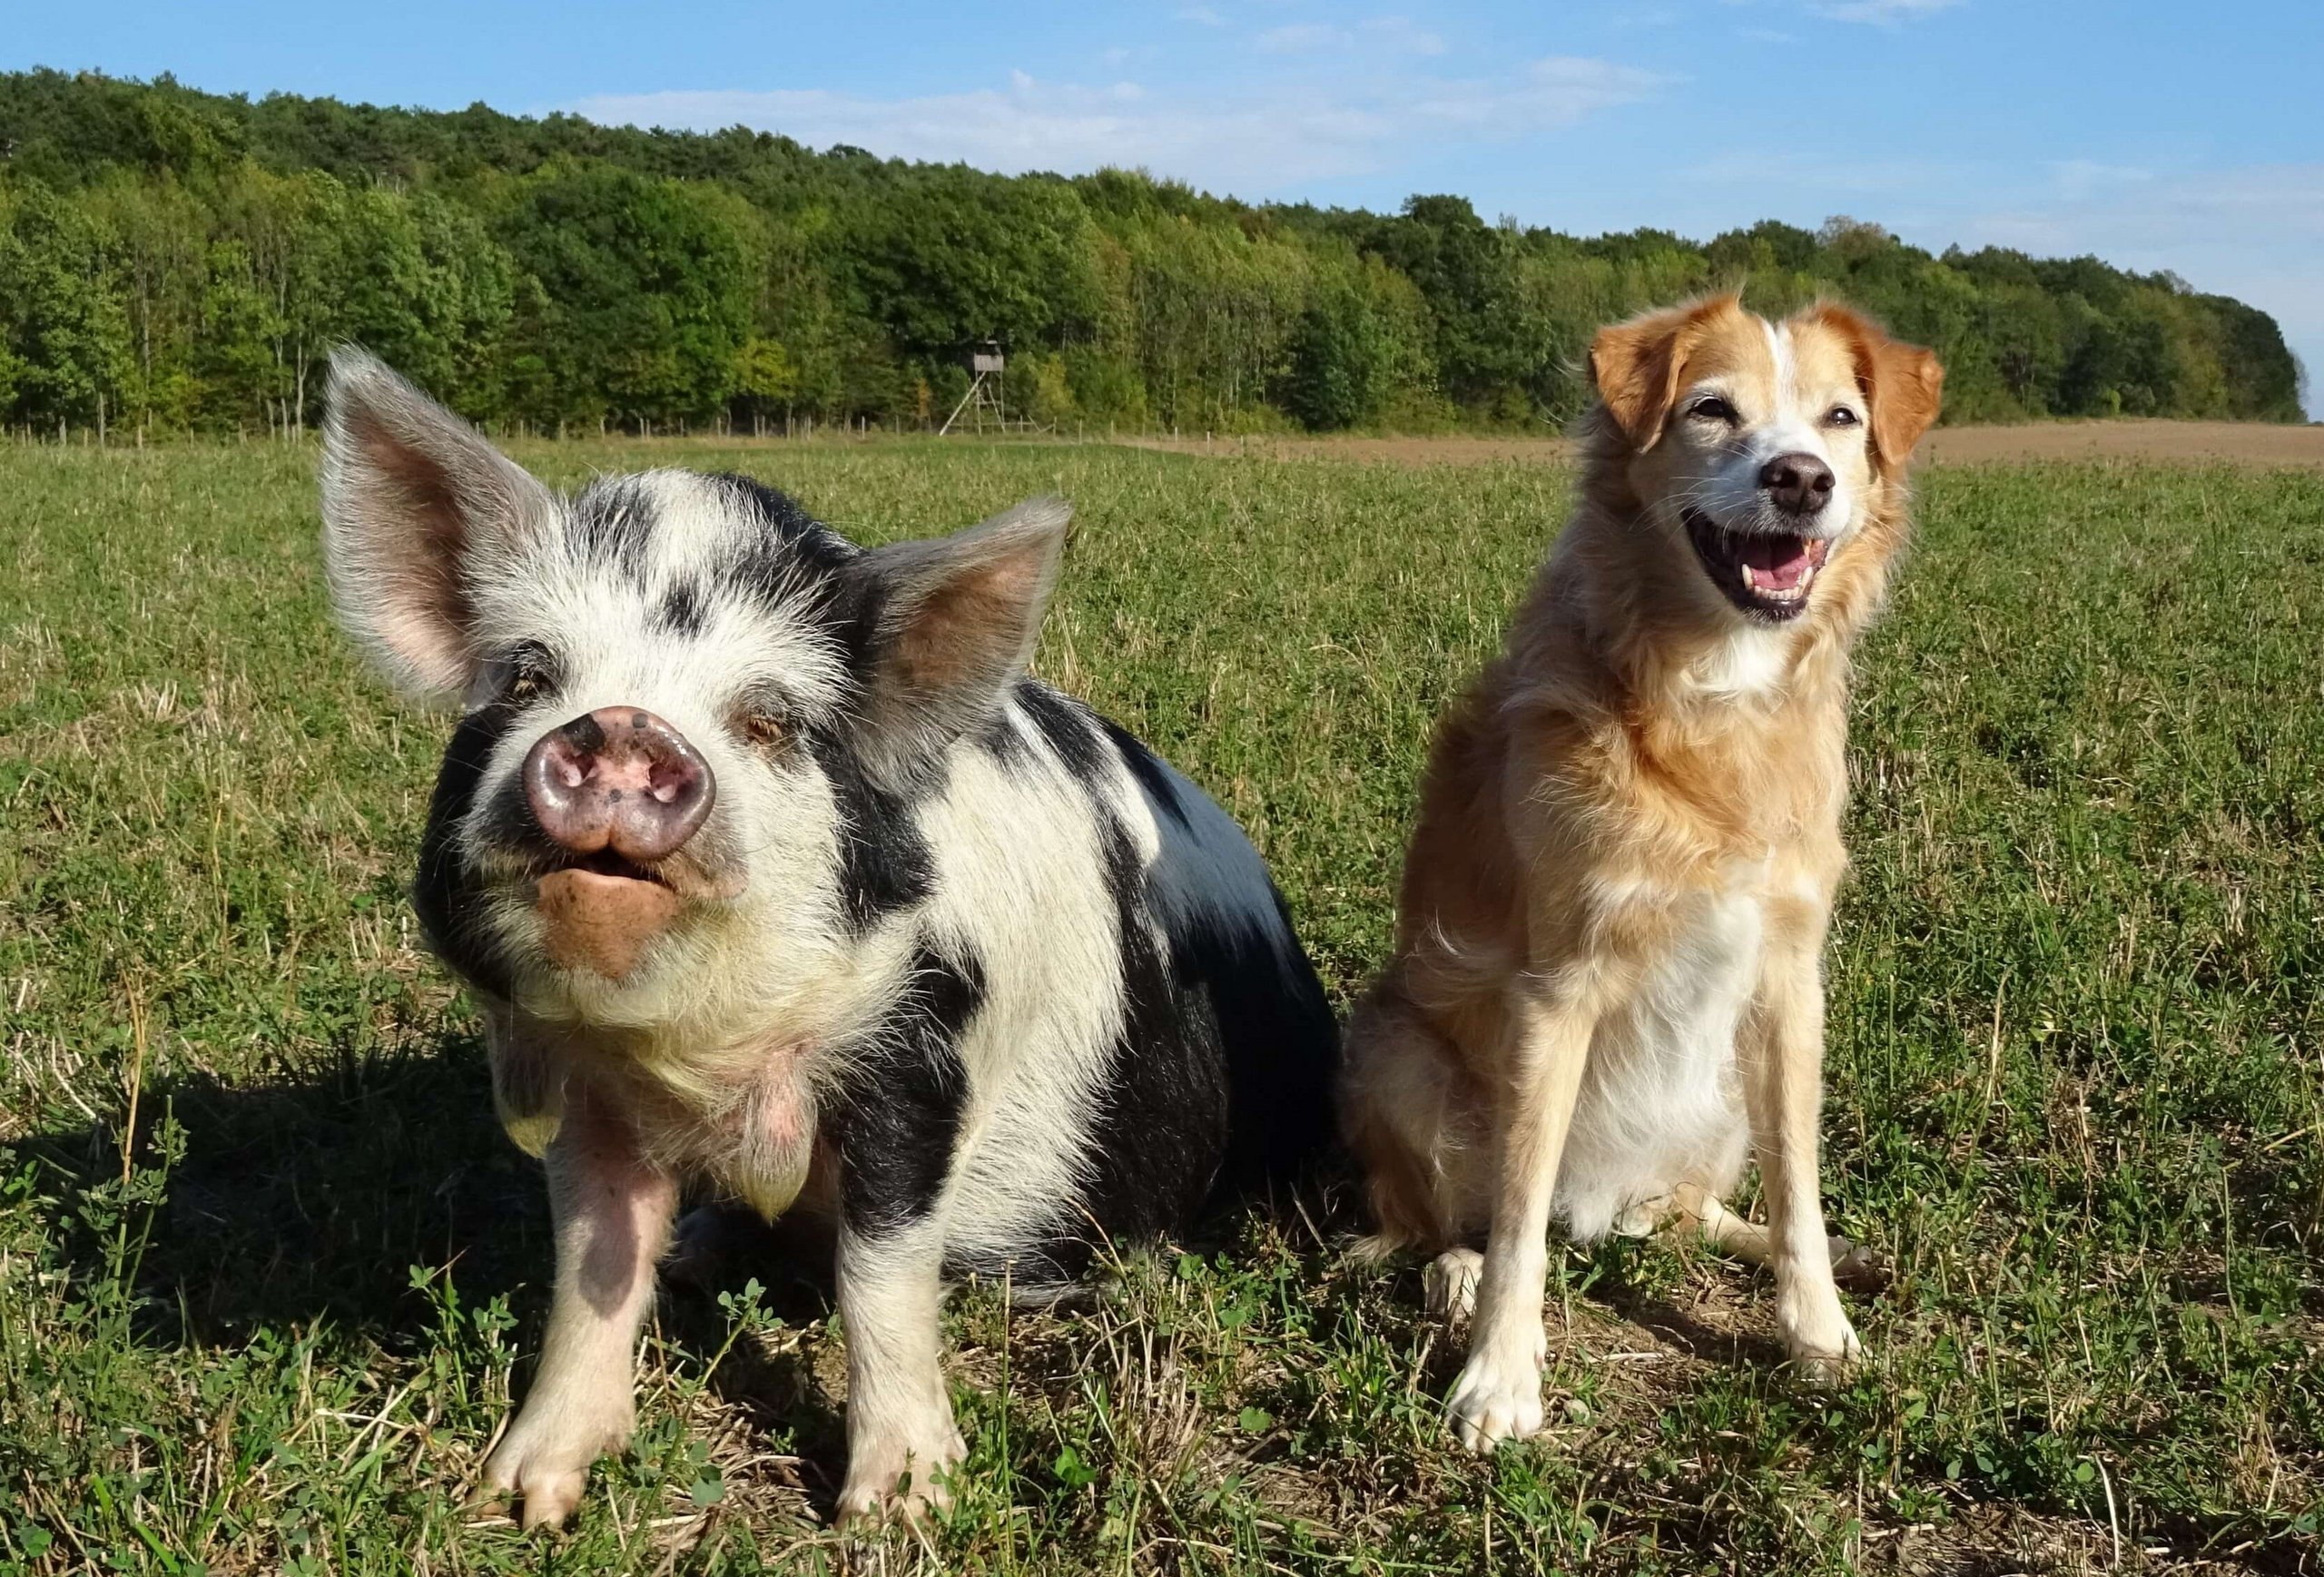 A dog sits next to a pig in a meadow